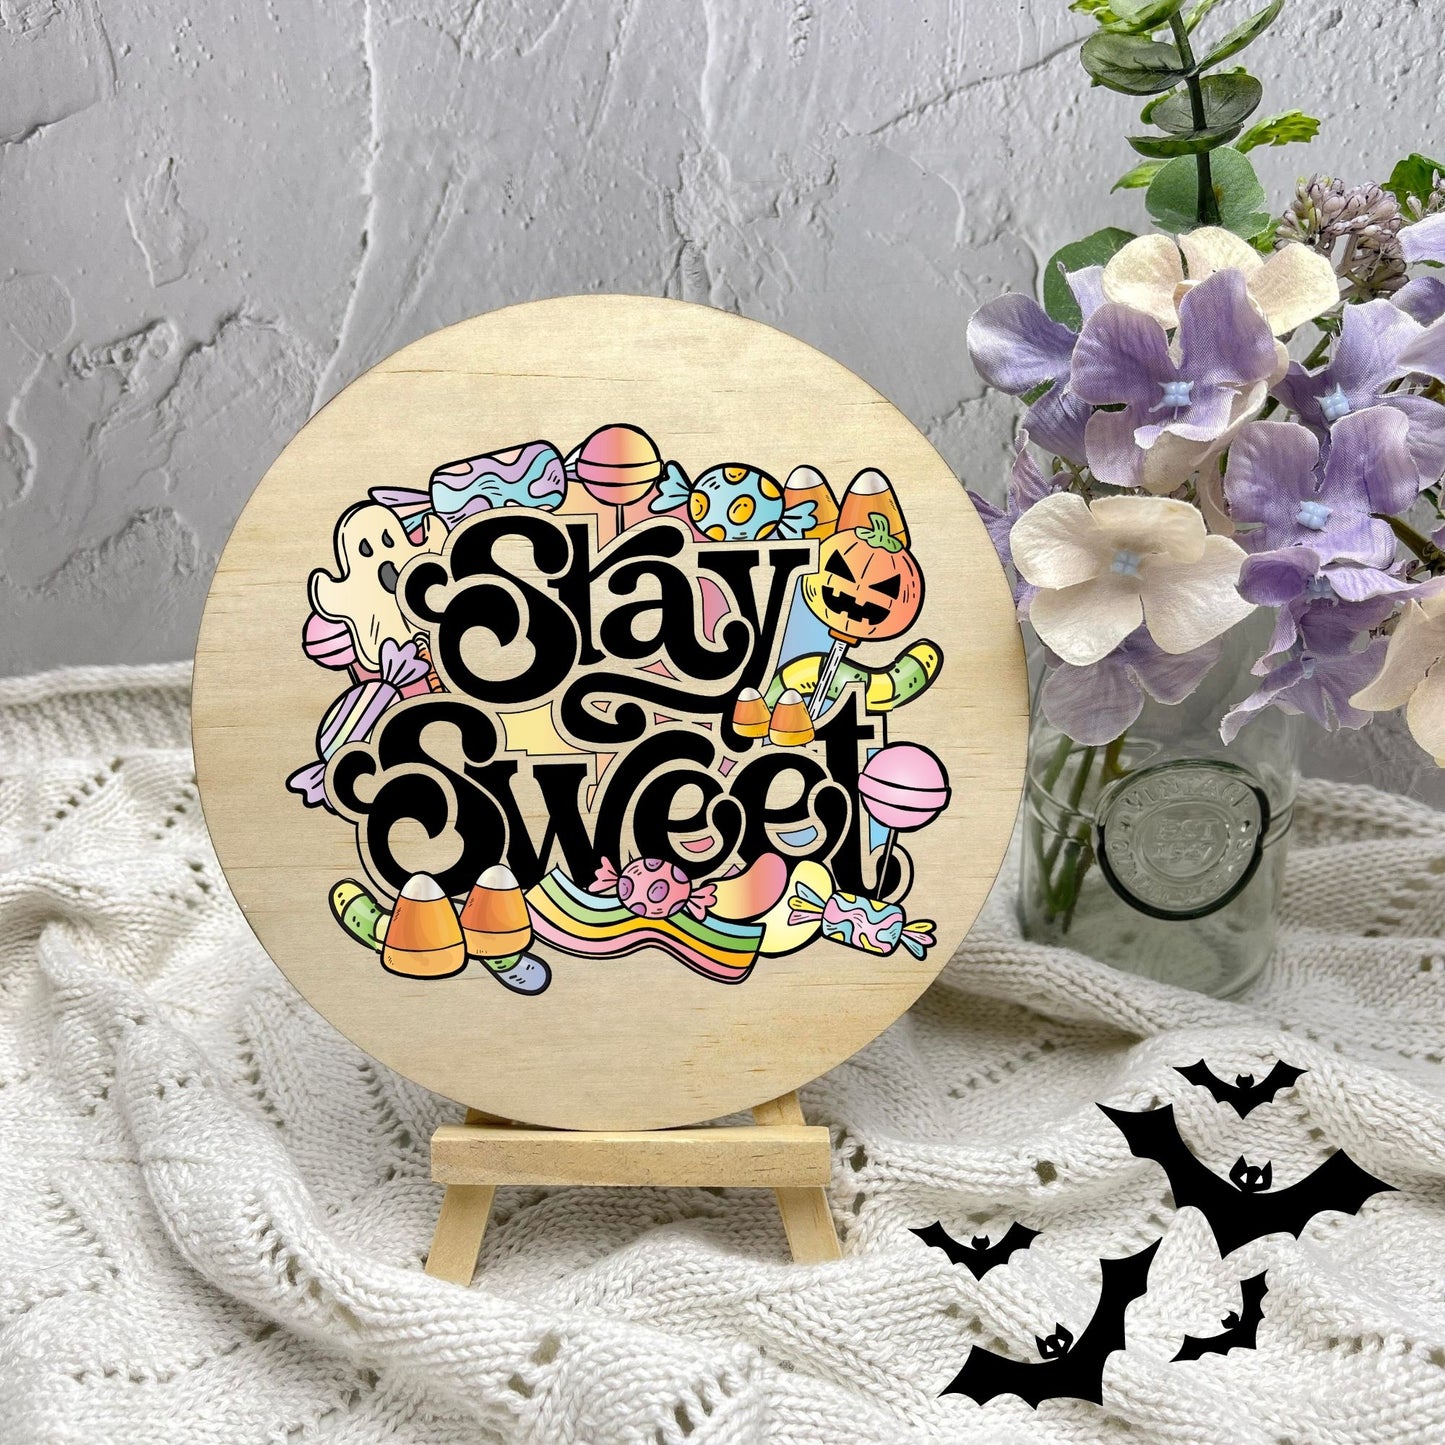 Stay sweet sign, Halloween Decor, Spooky Vibes, hocus pocus sign, trick or treat decor, haunted house h1